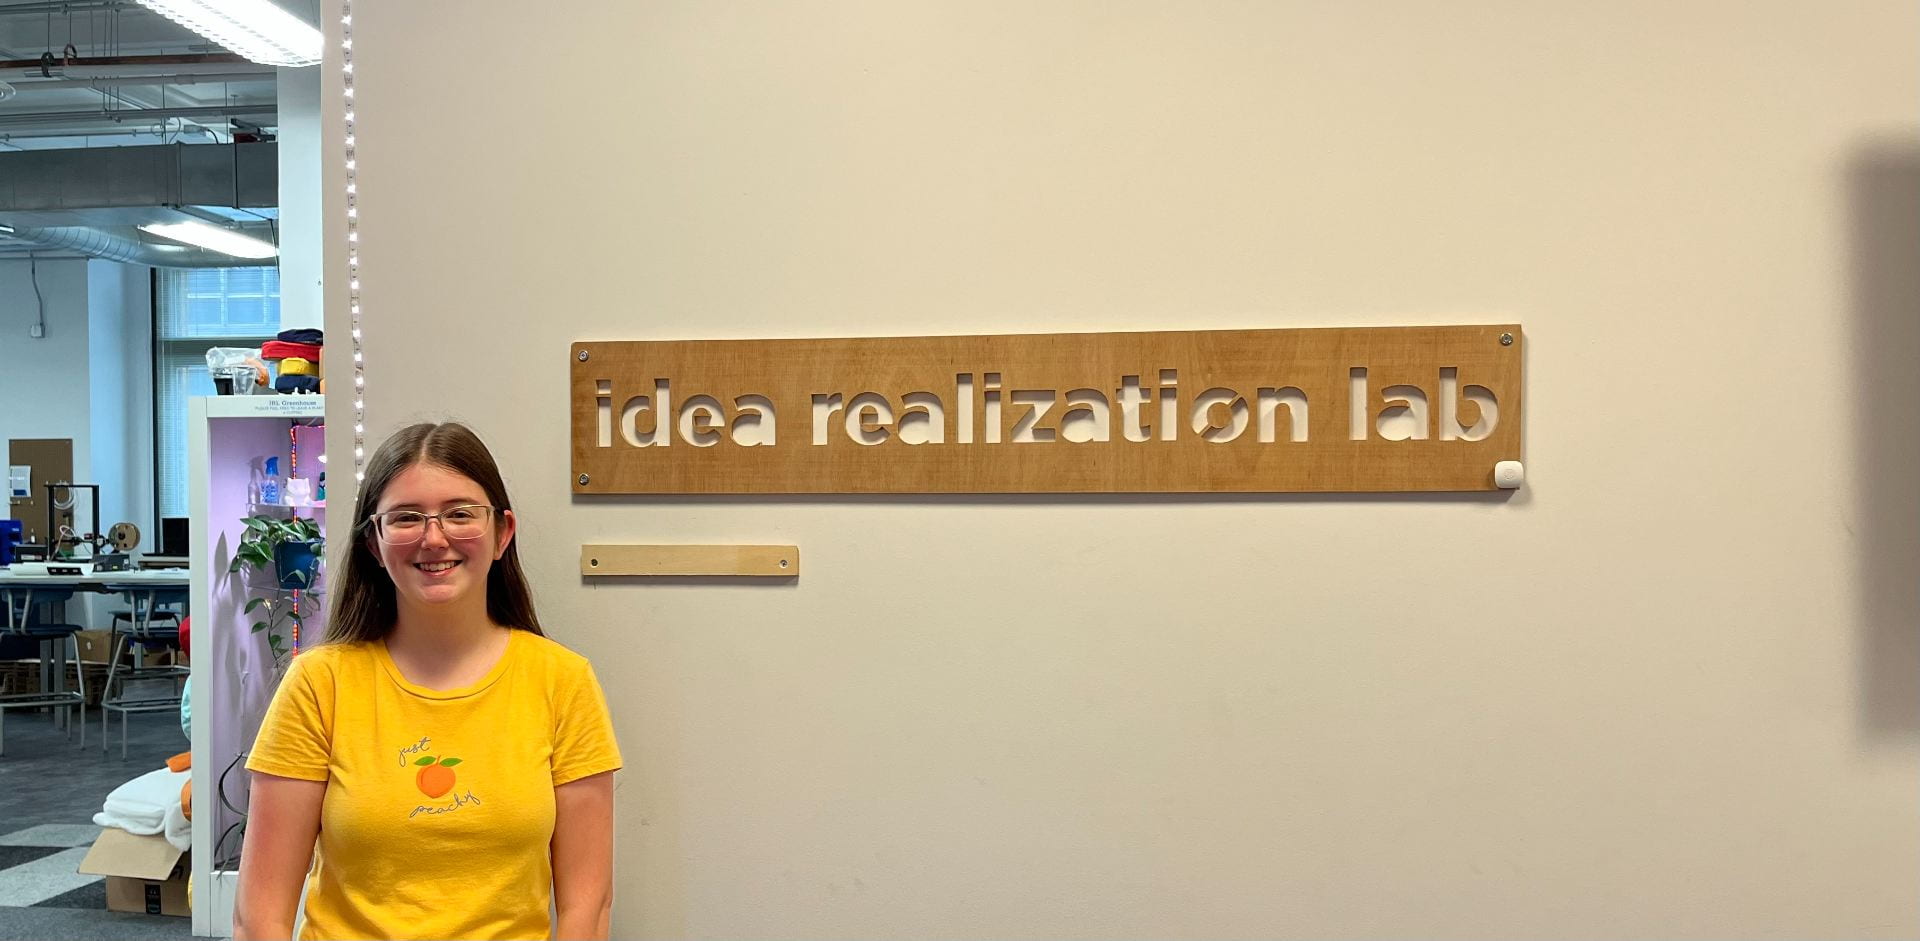 Sienna, a college student, smiling while standing in front of the Idea Realization Sign, in the DePaul loop campus art lab.